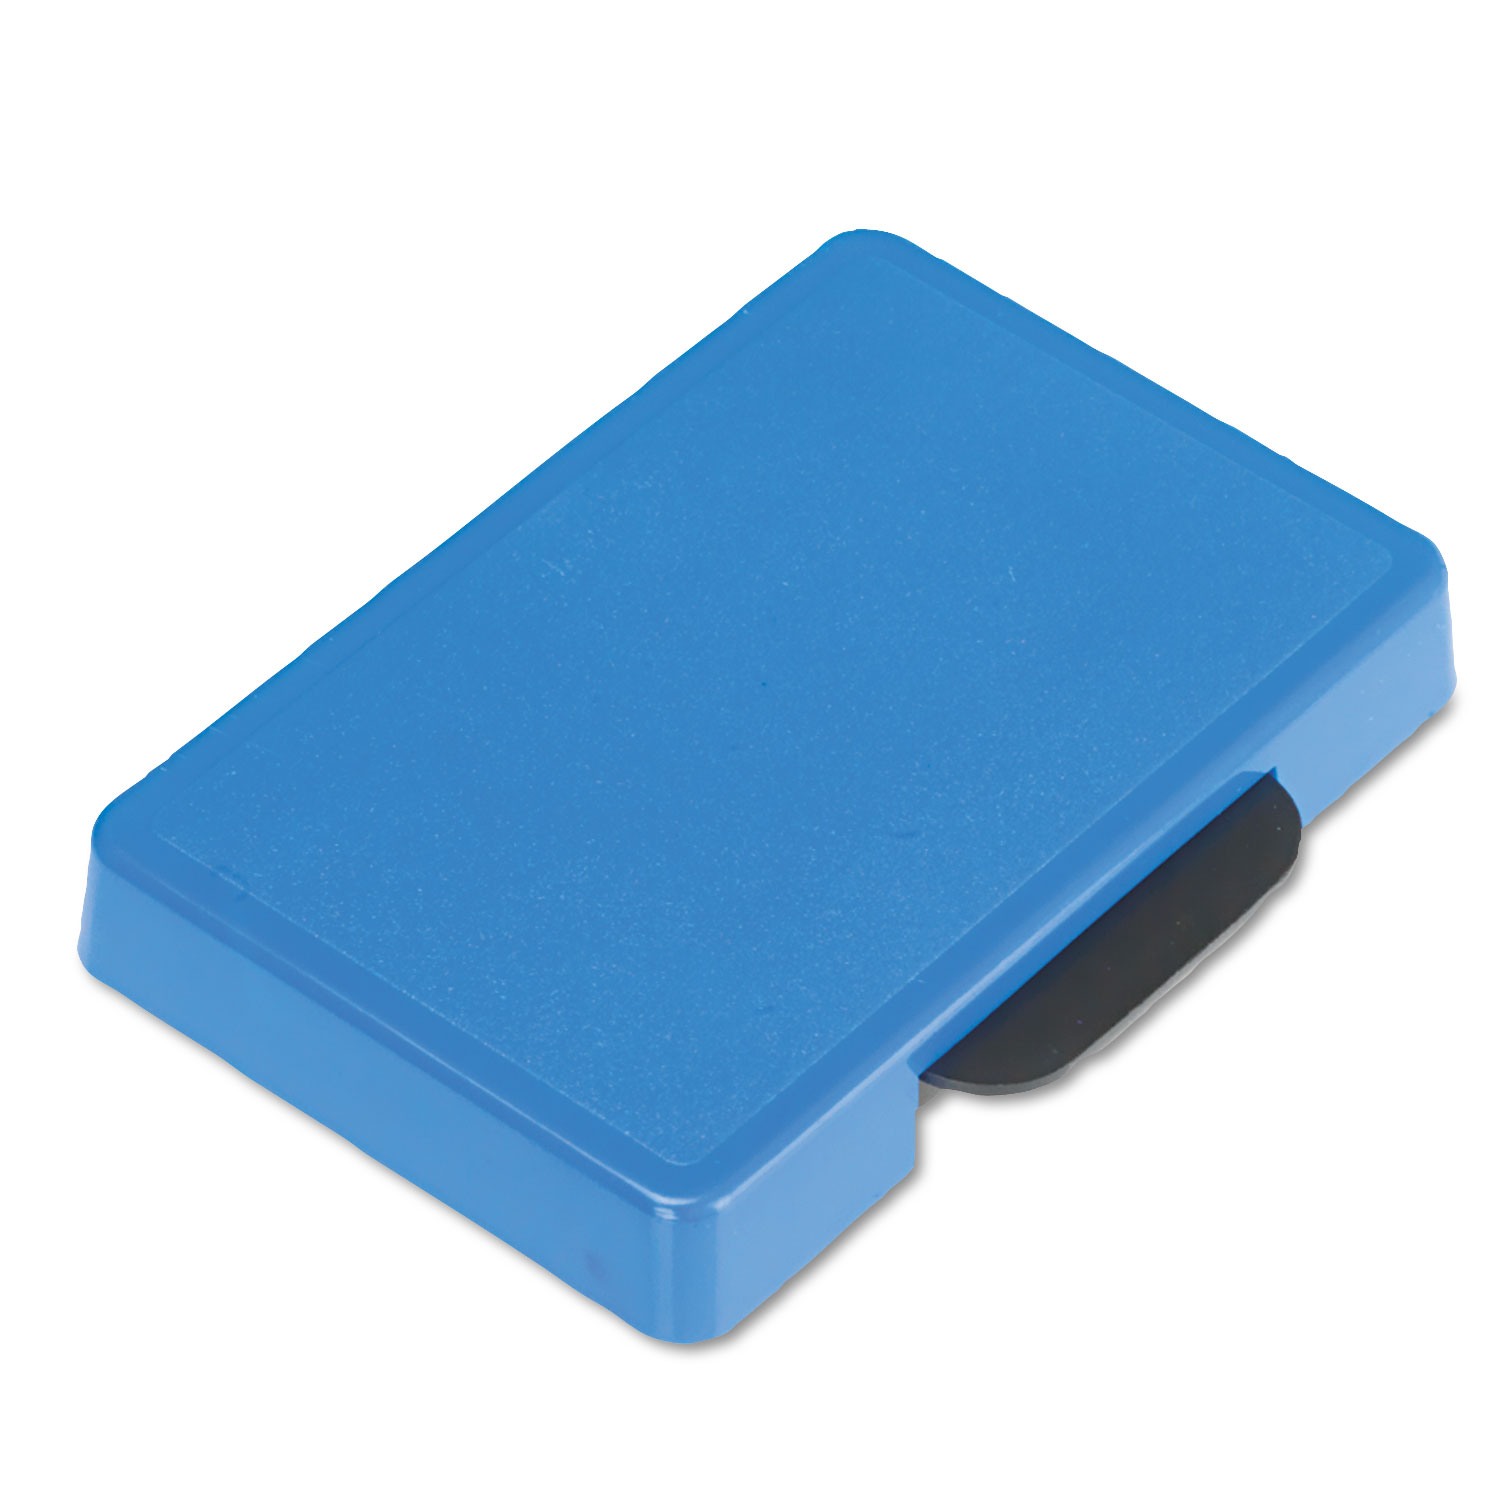  Identity Group P5460BL Trodat T5460 Dater Replacement Ink Pad, 1 3/8 x 2 3/8, Blue (USSP5460BL) 